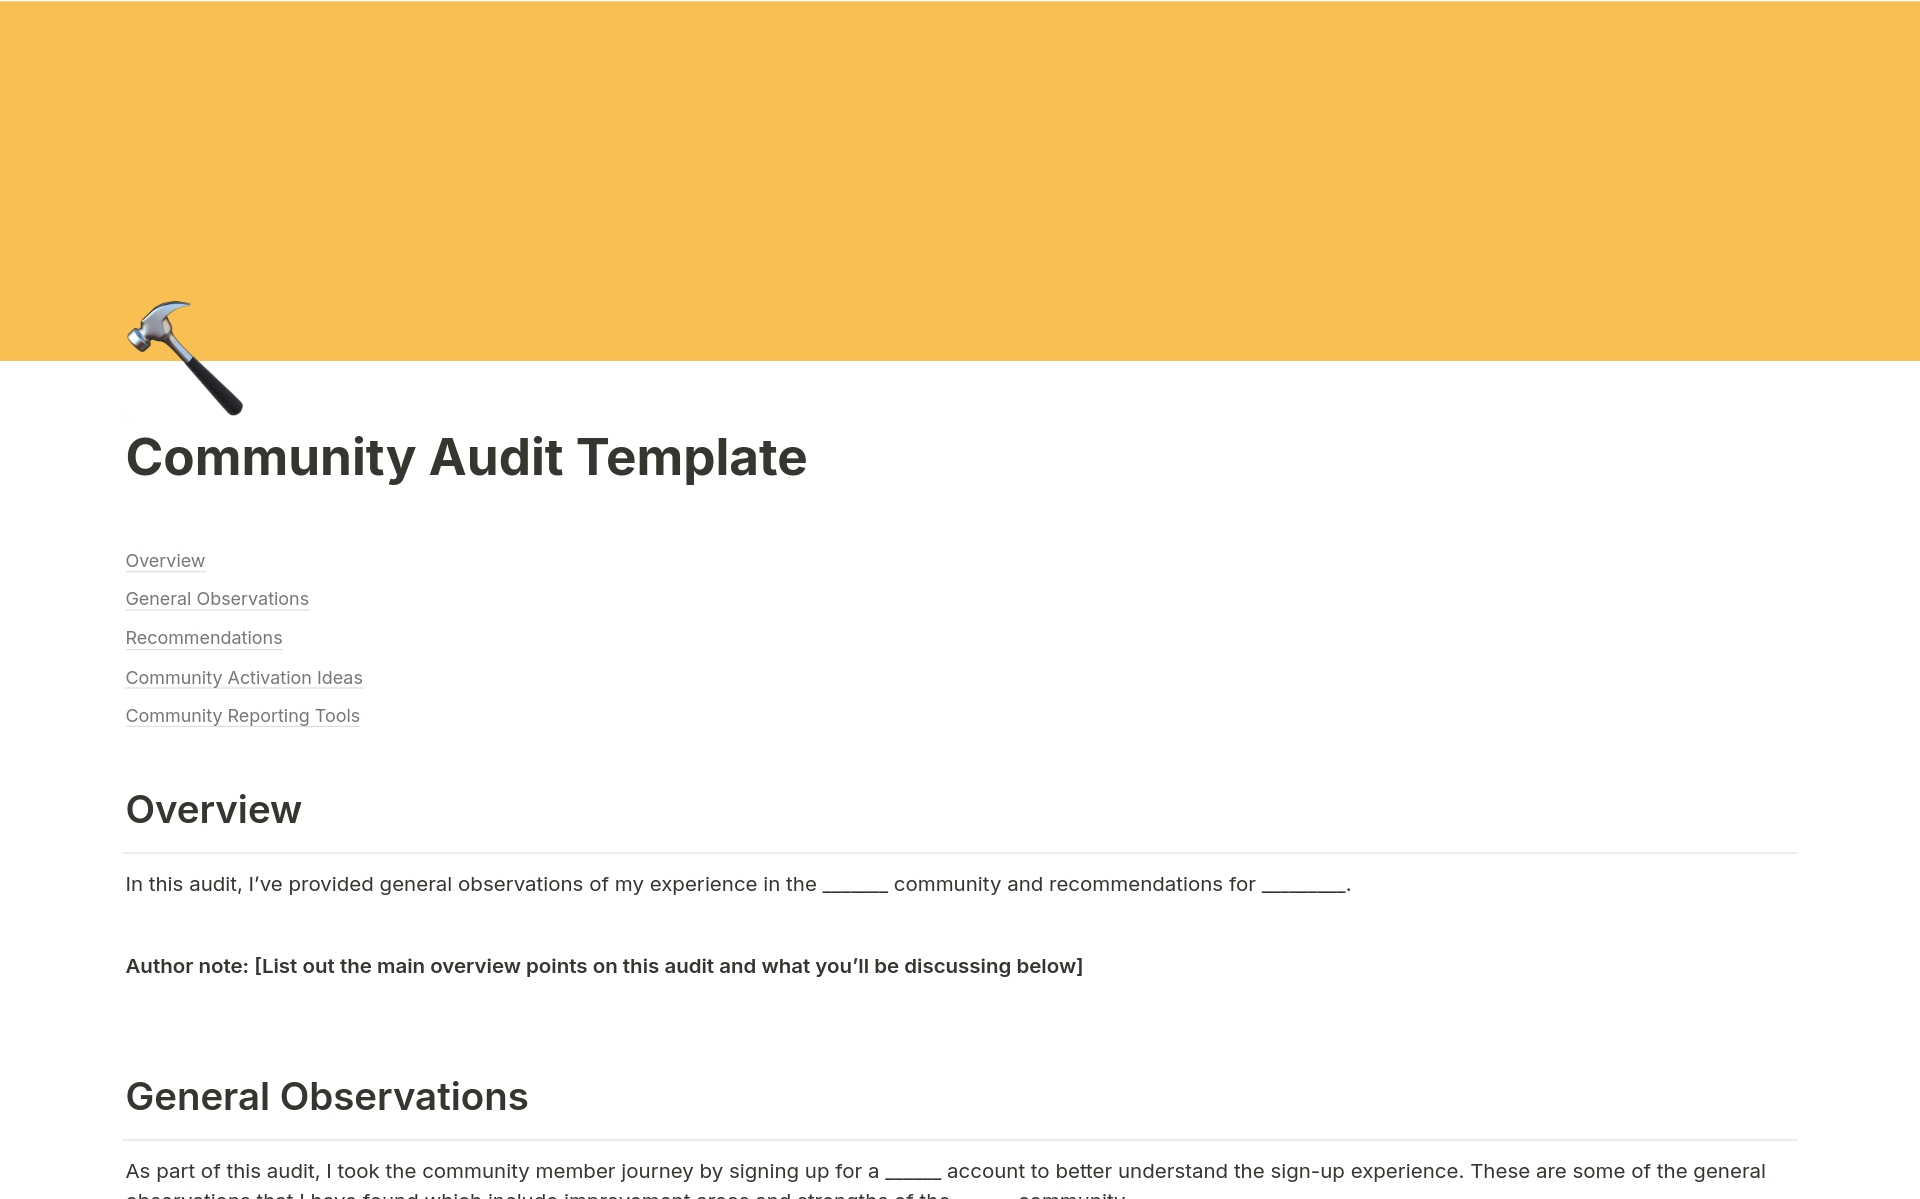 If you're looking to run an audit on a community, this template is for you.